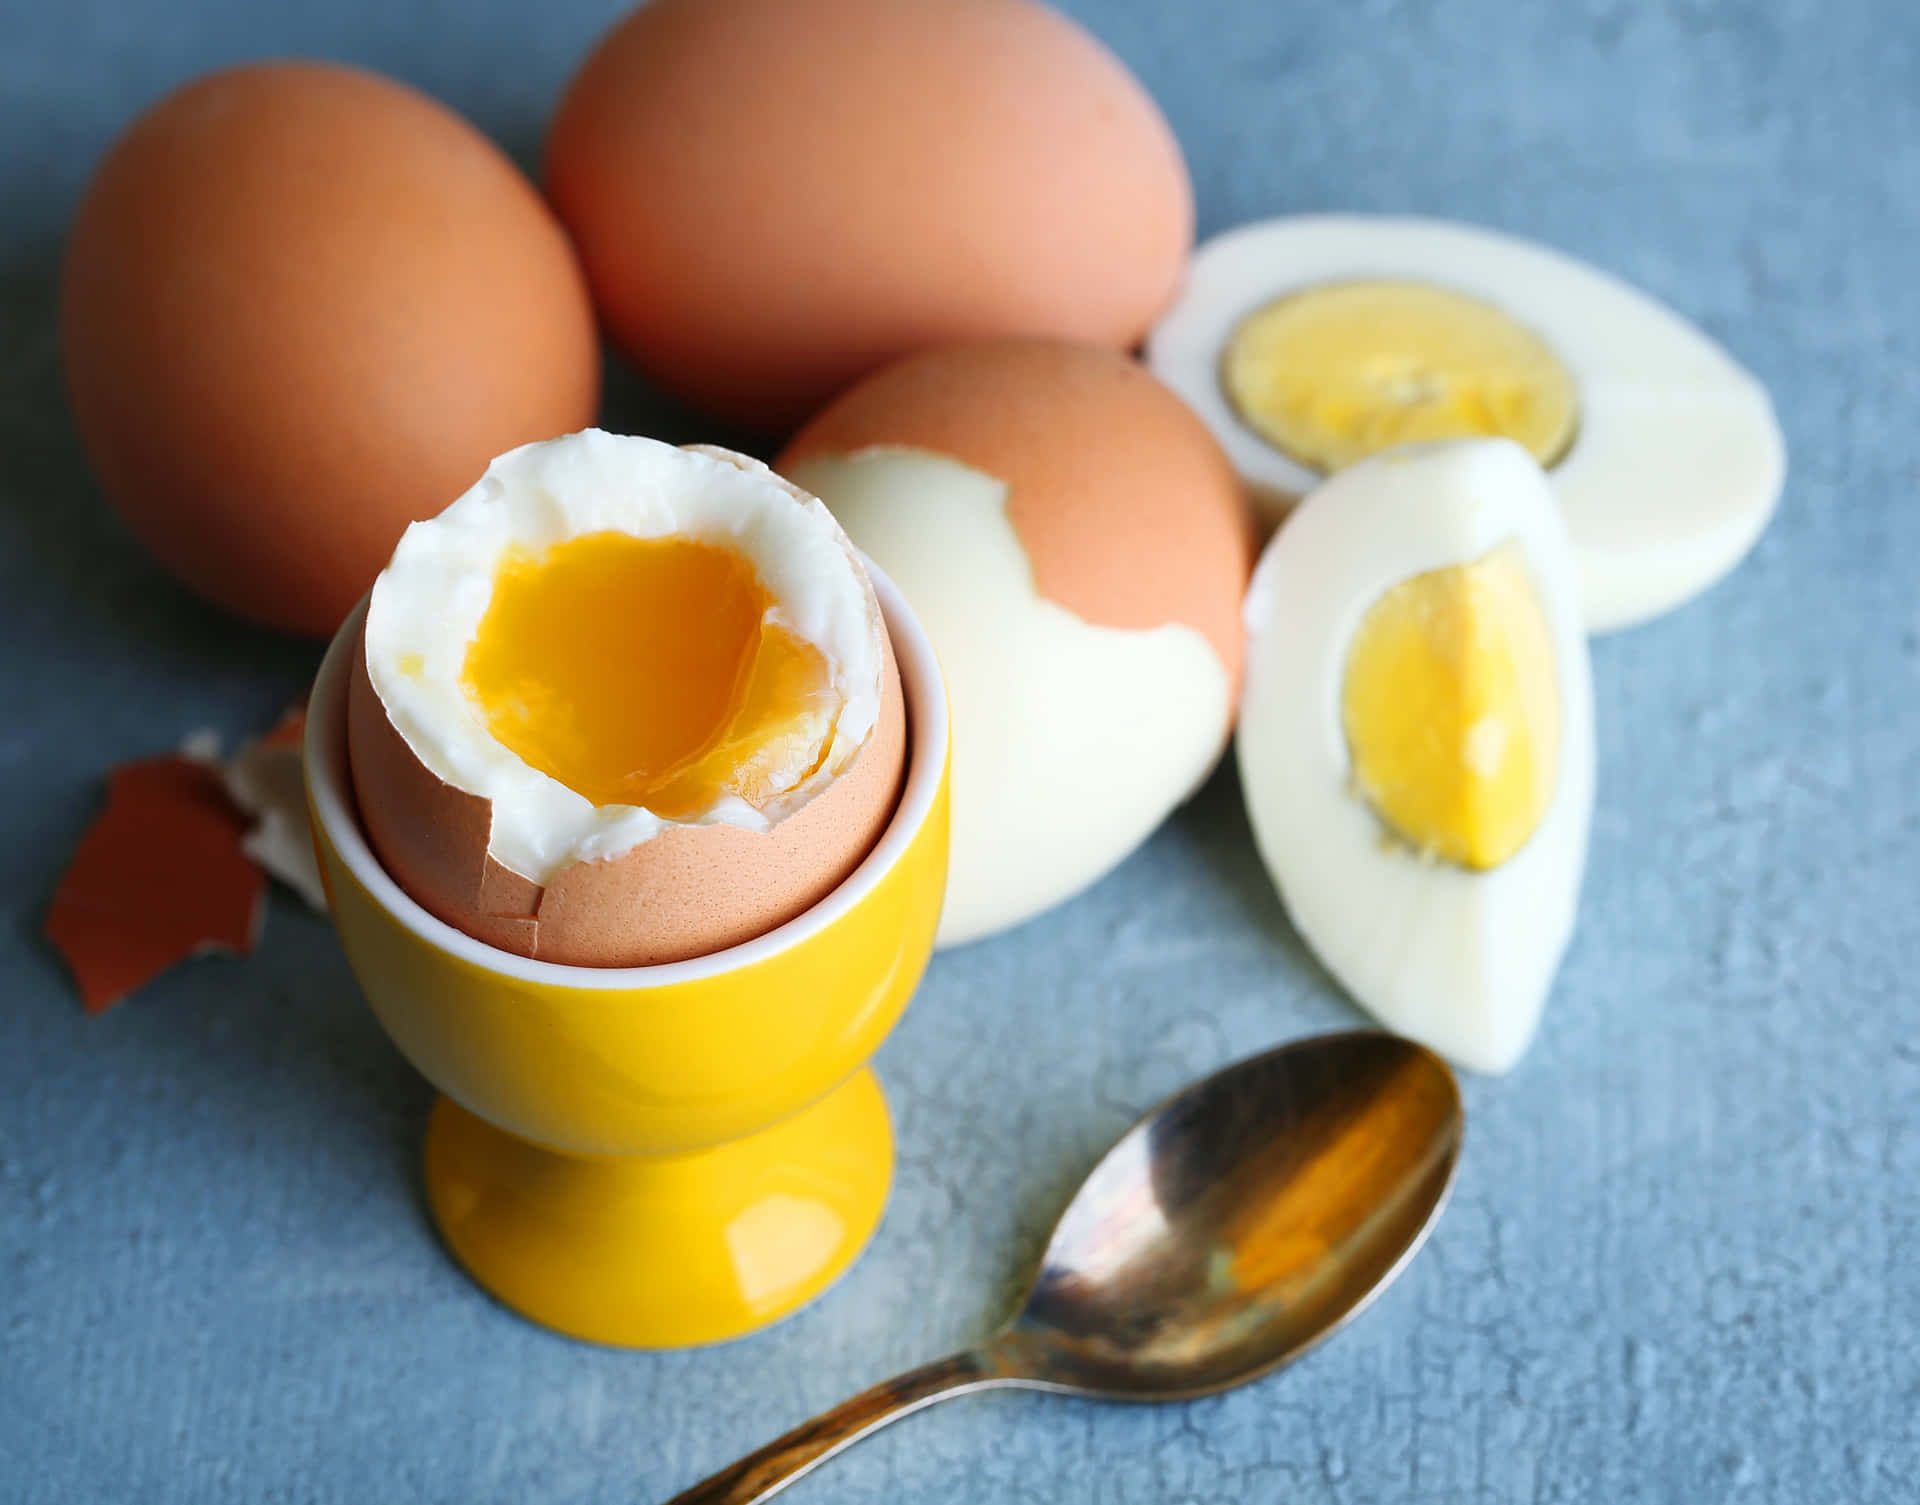 A Yellow Egg Cup With A Spoon And A Broken Egg